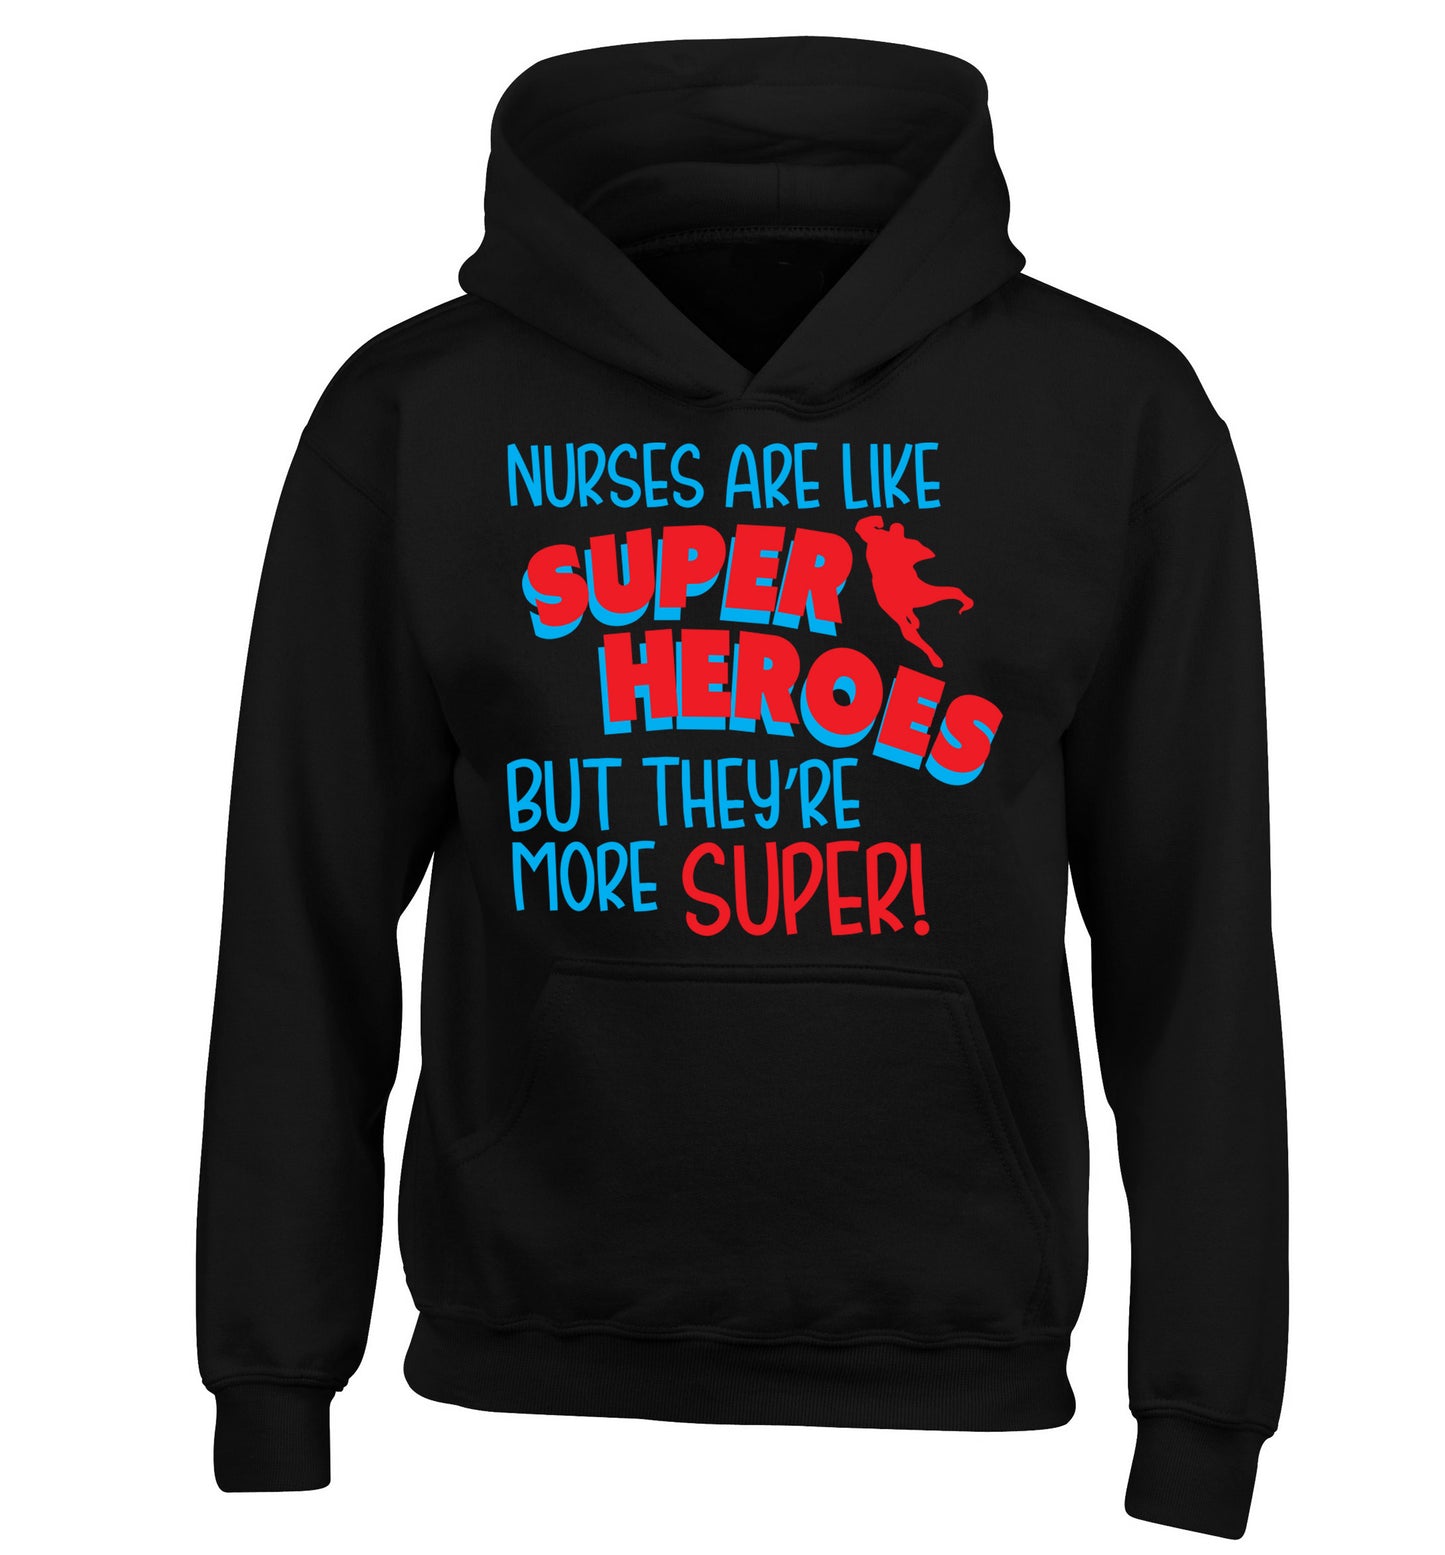 Nurses are like superheros but they're more super children's black hoodie 12-13 Years